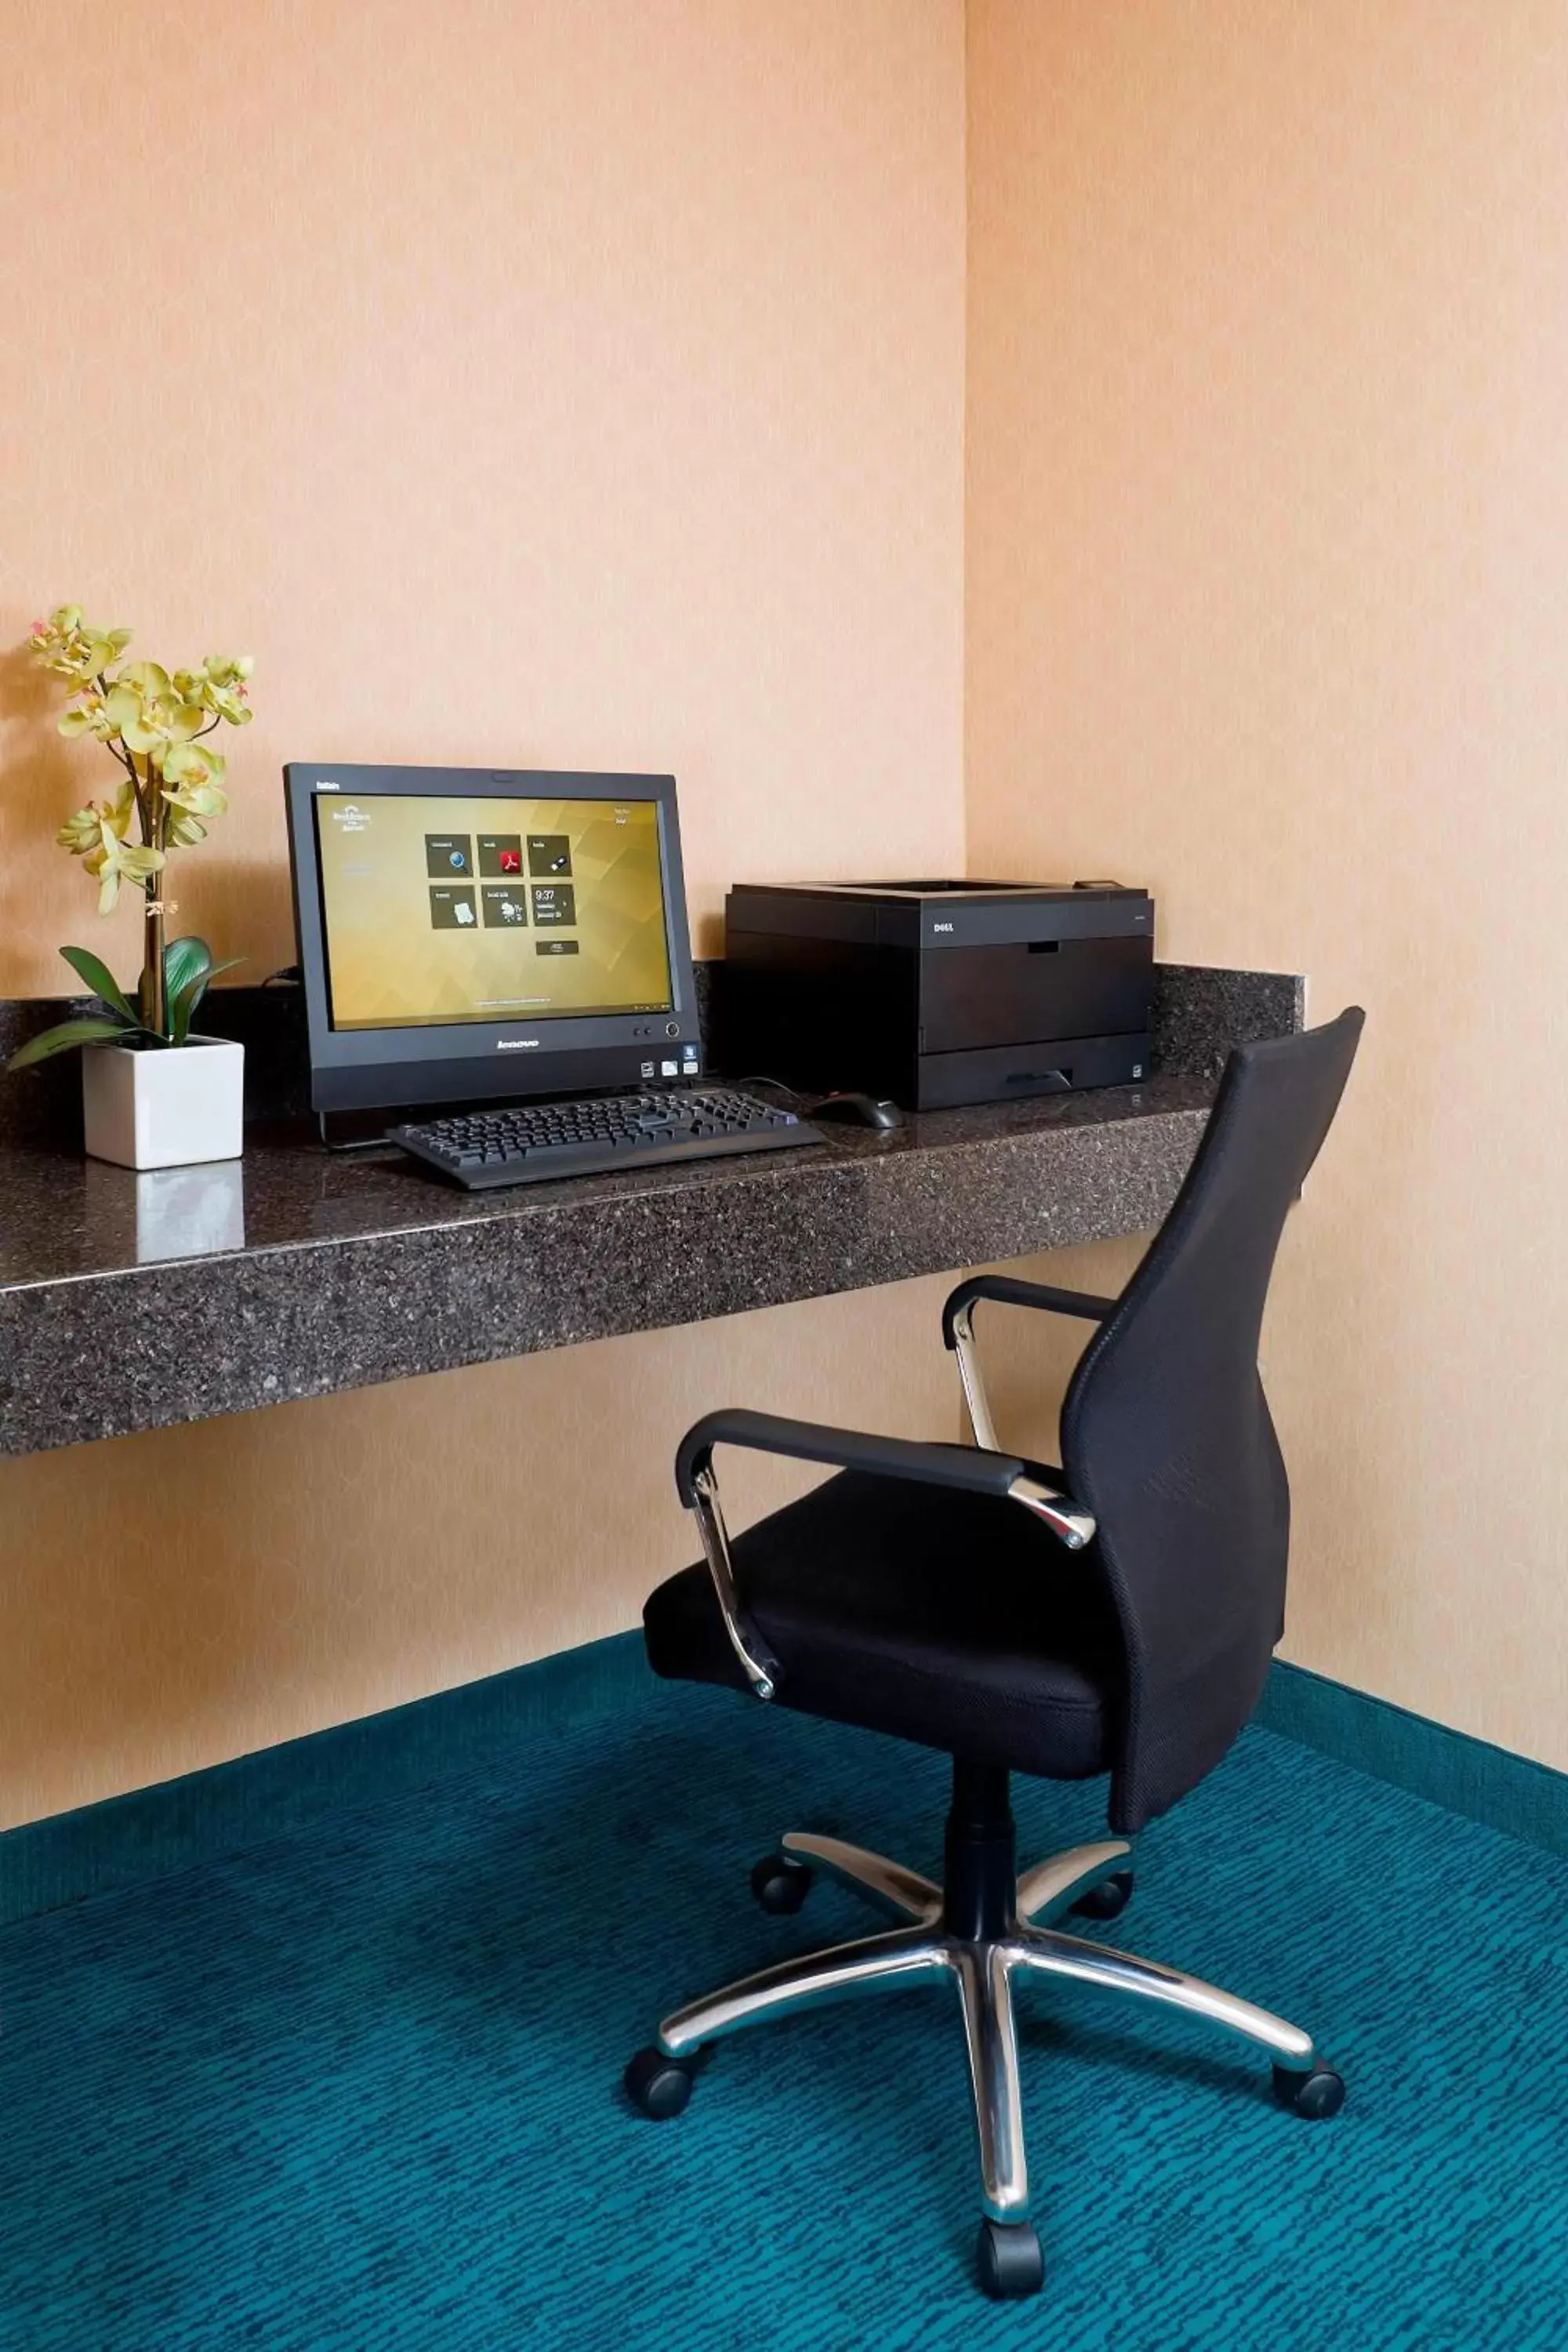 Business facilities in Residence Inn by Marriott Dallas Lewisville